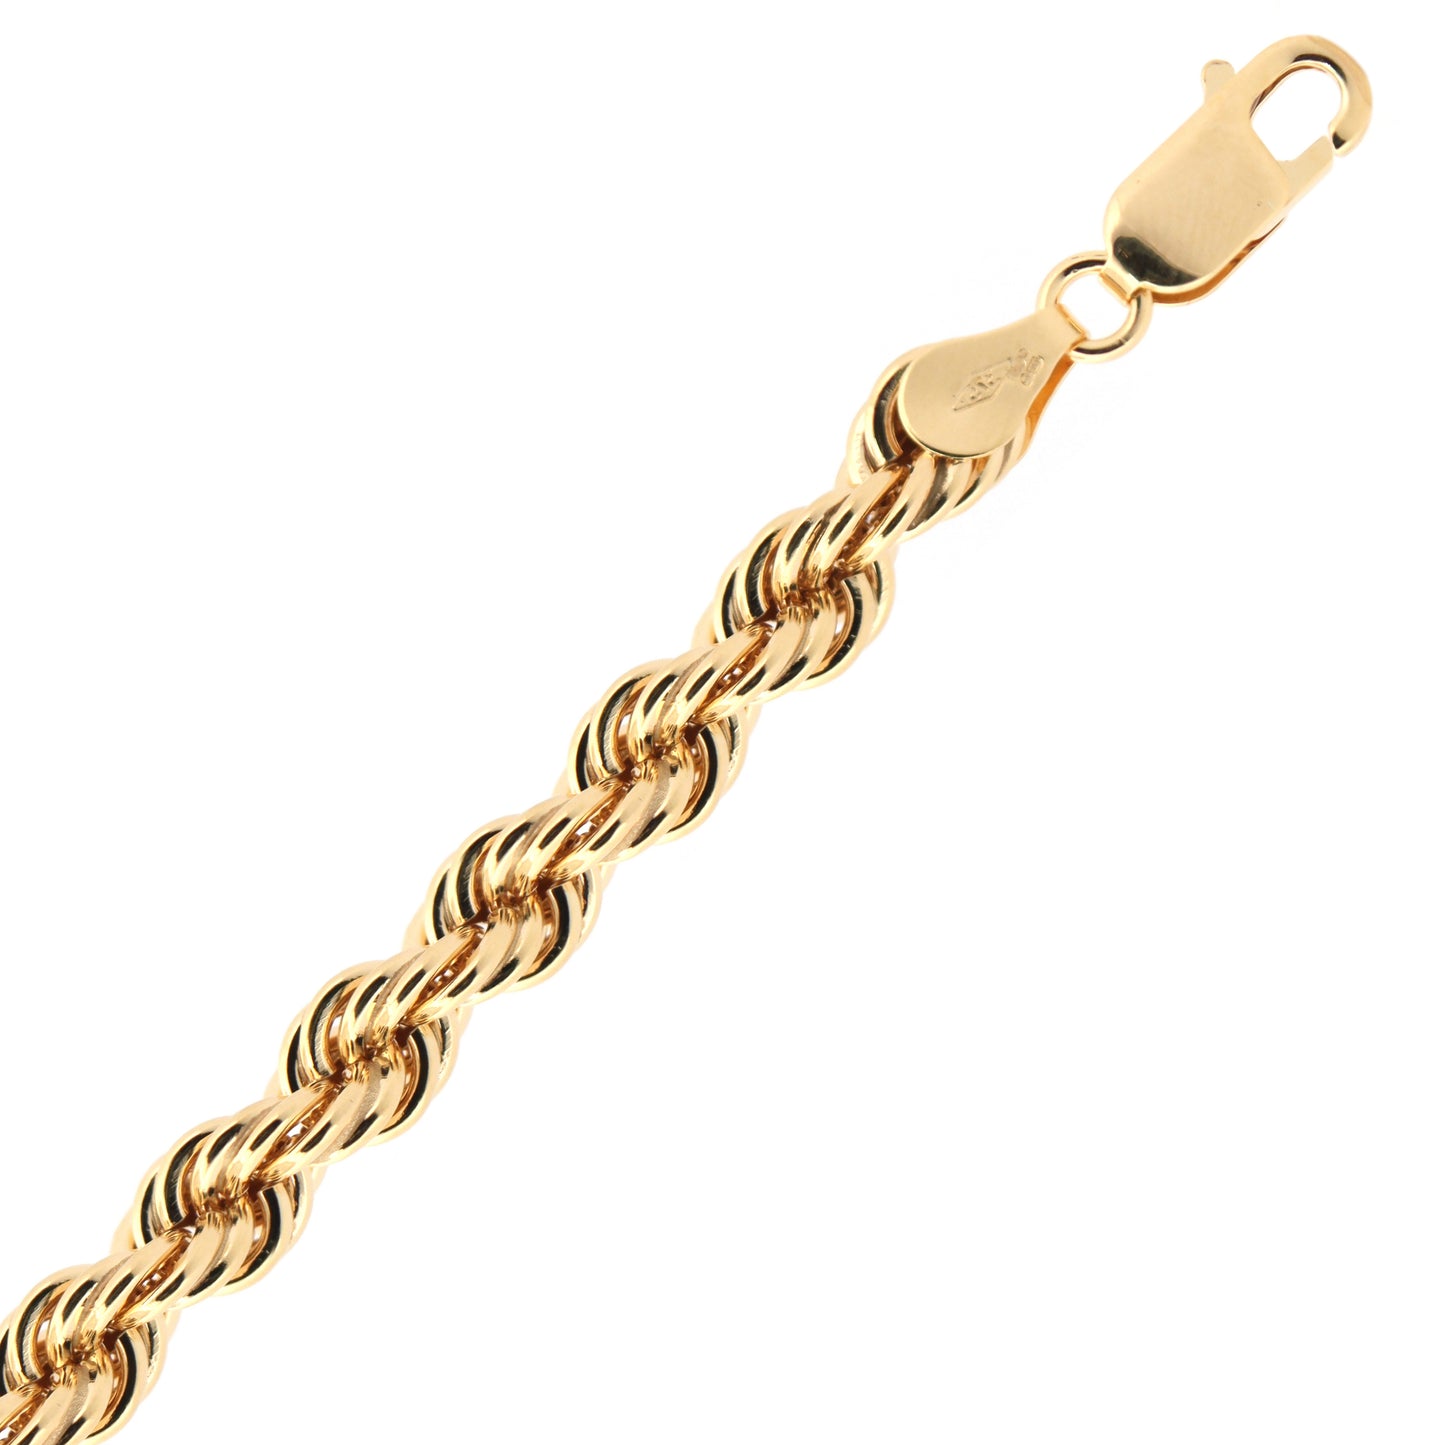 9ct Gold  Diamond Cut Hollow Rope 6mm Chain Necklace - JBB325E